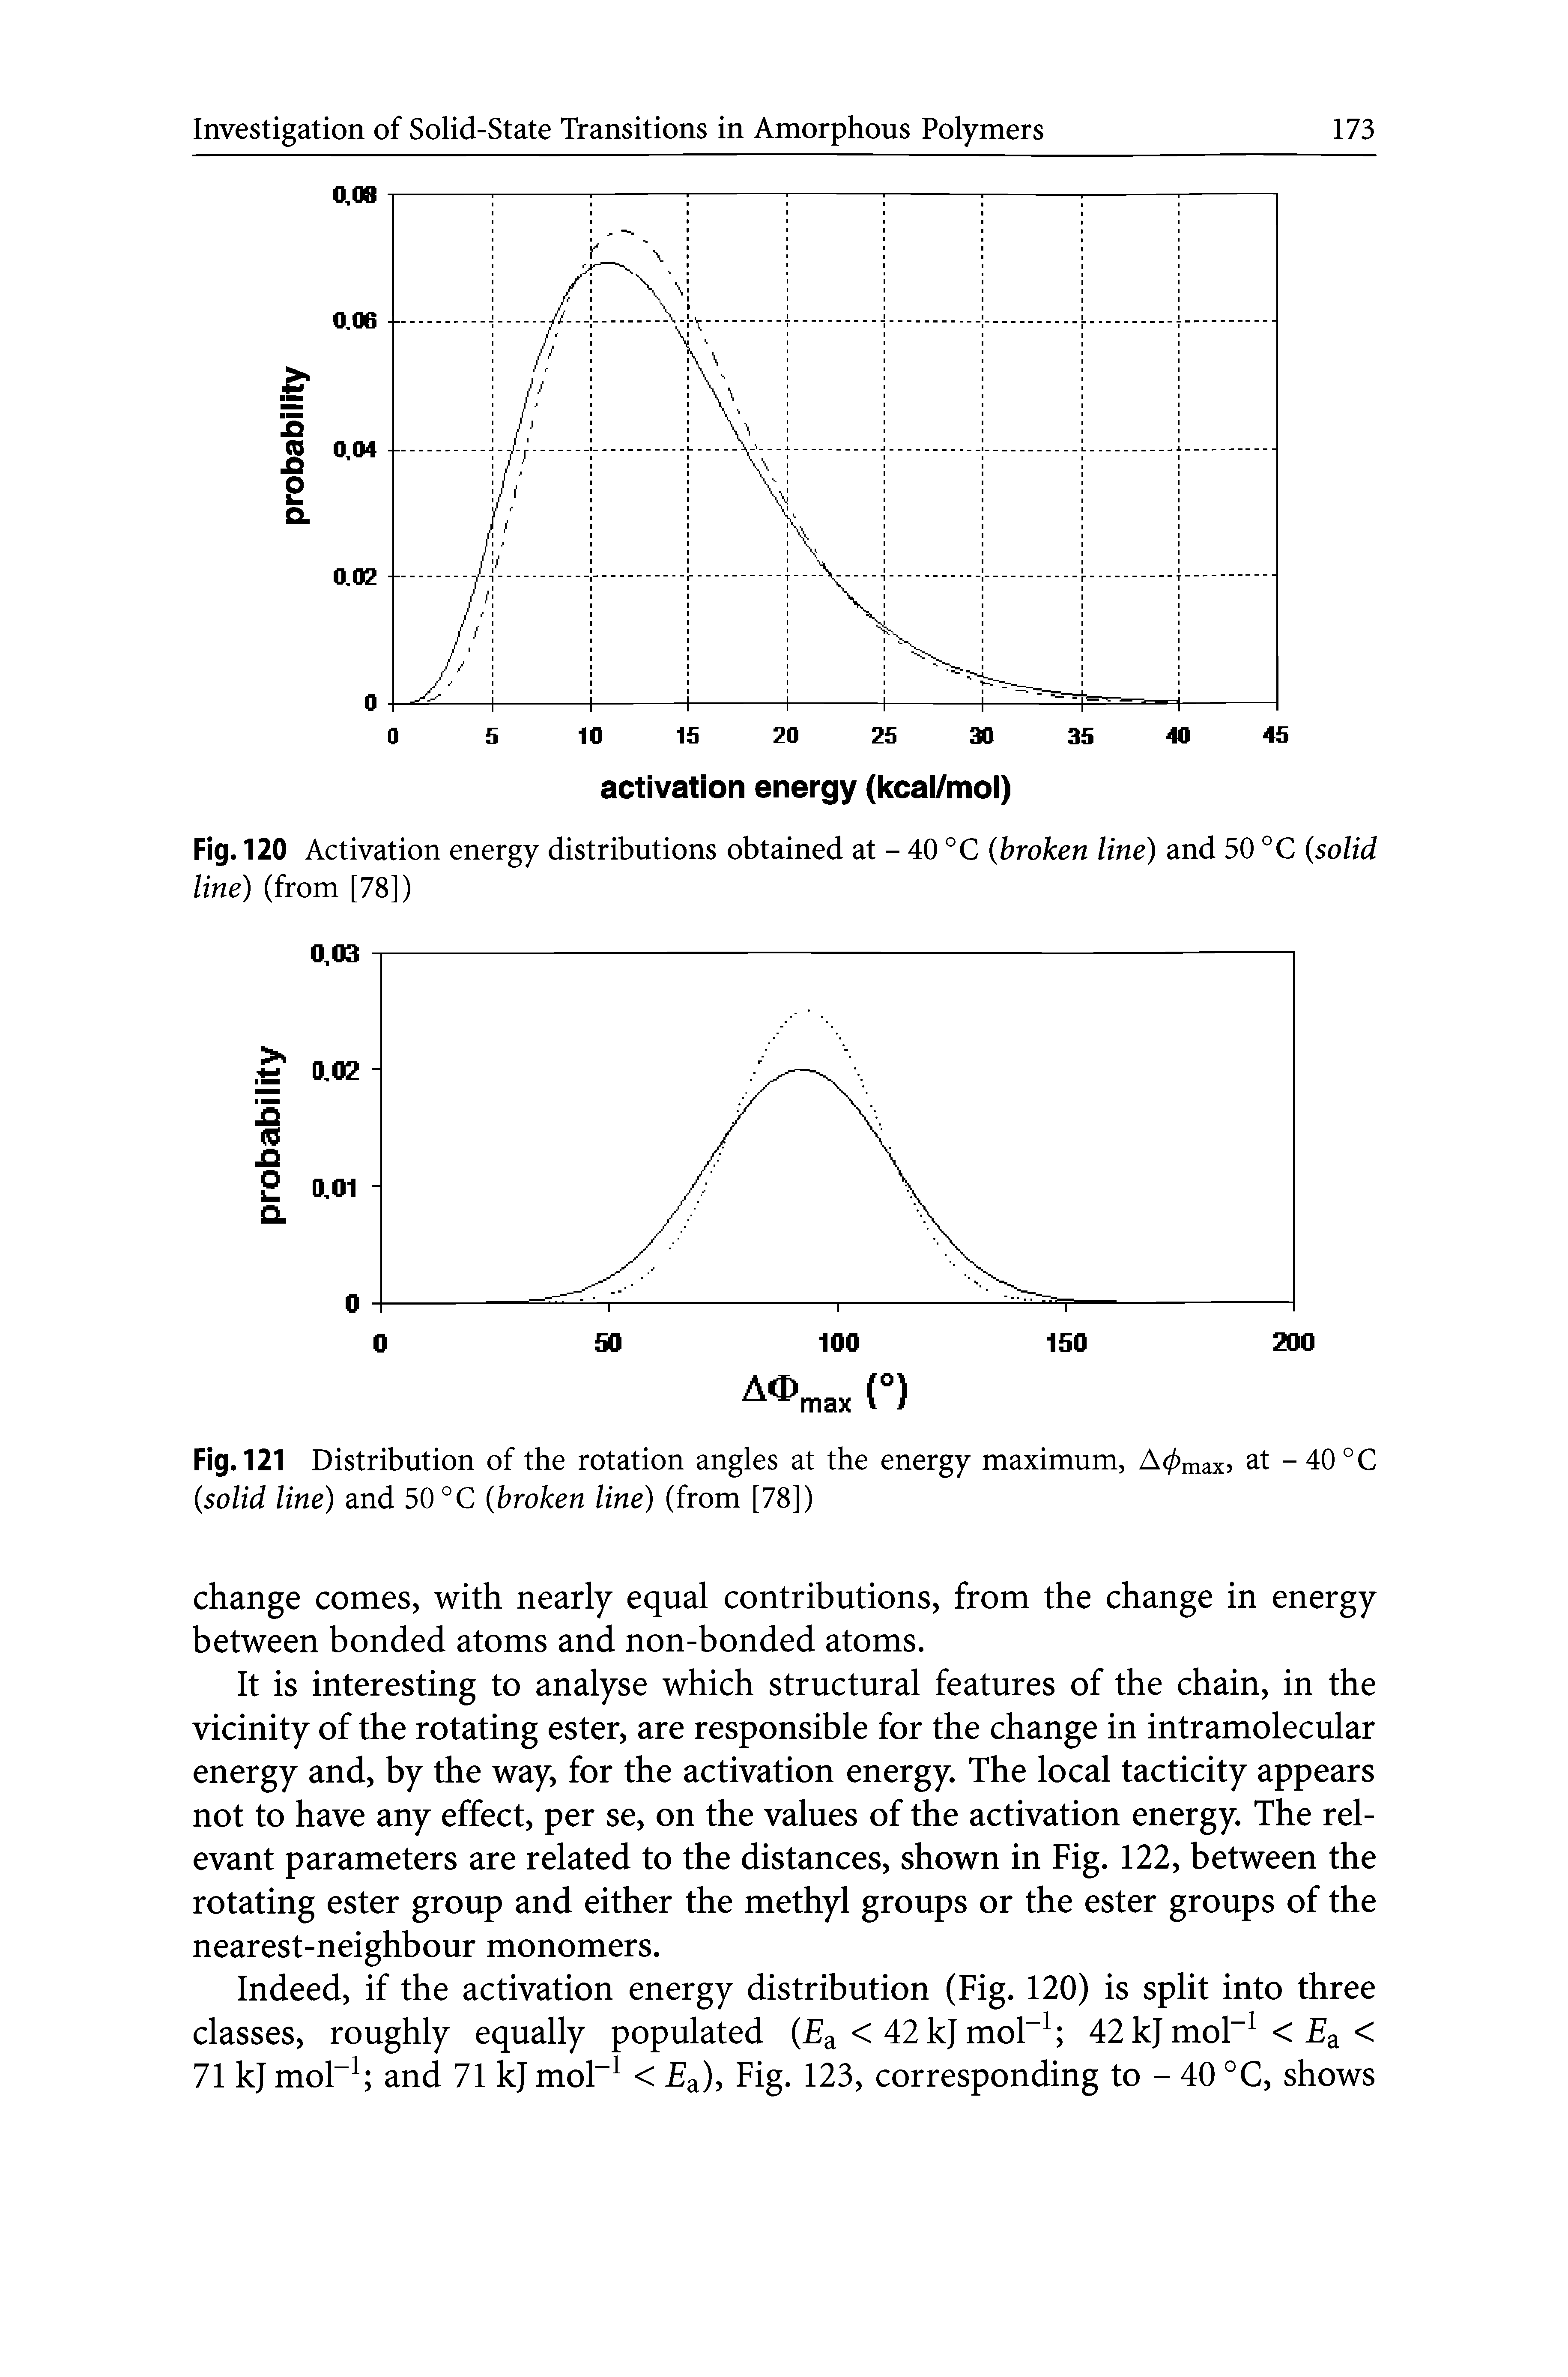 Fig. 120 Activation energy distributions obtained at - 40 °C (broken line) and 50 °C (solid line) (from [78])...